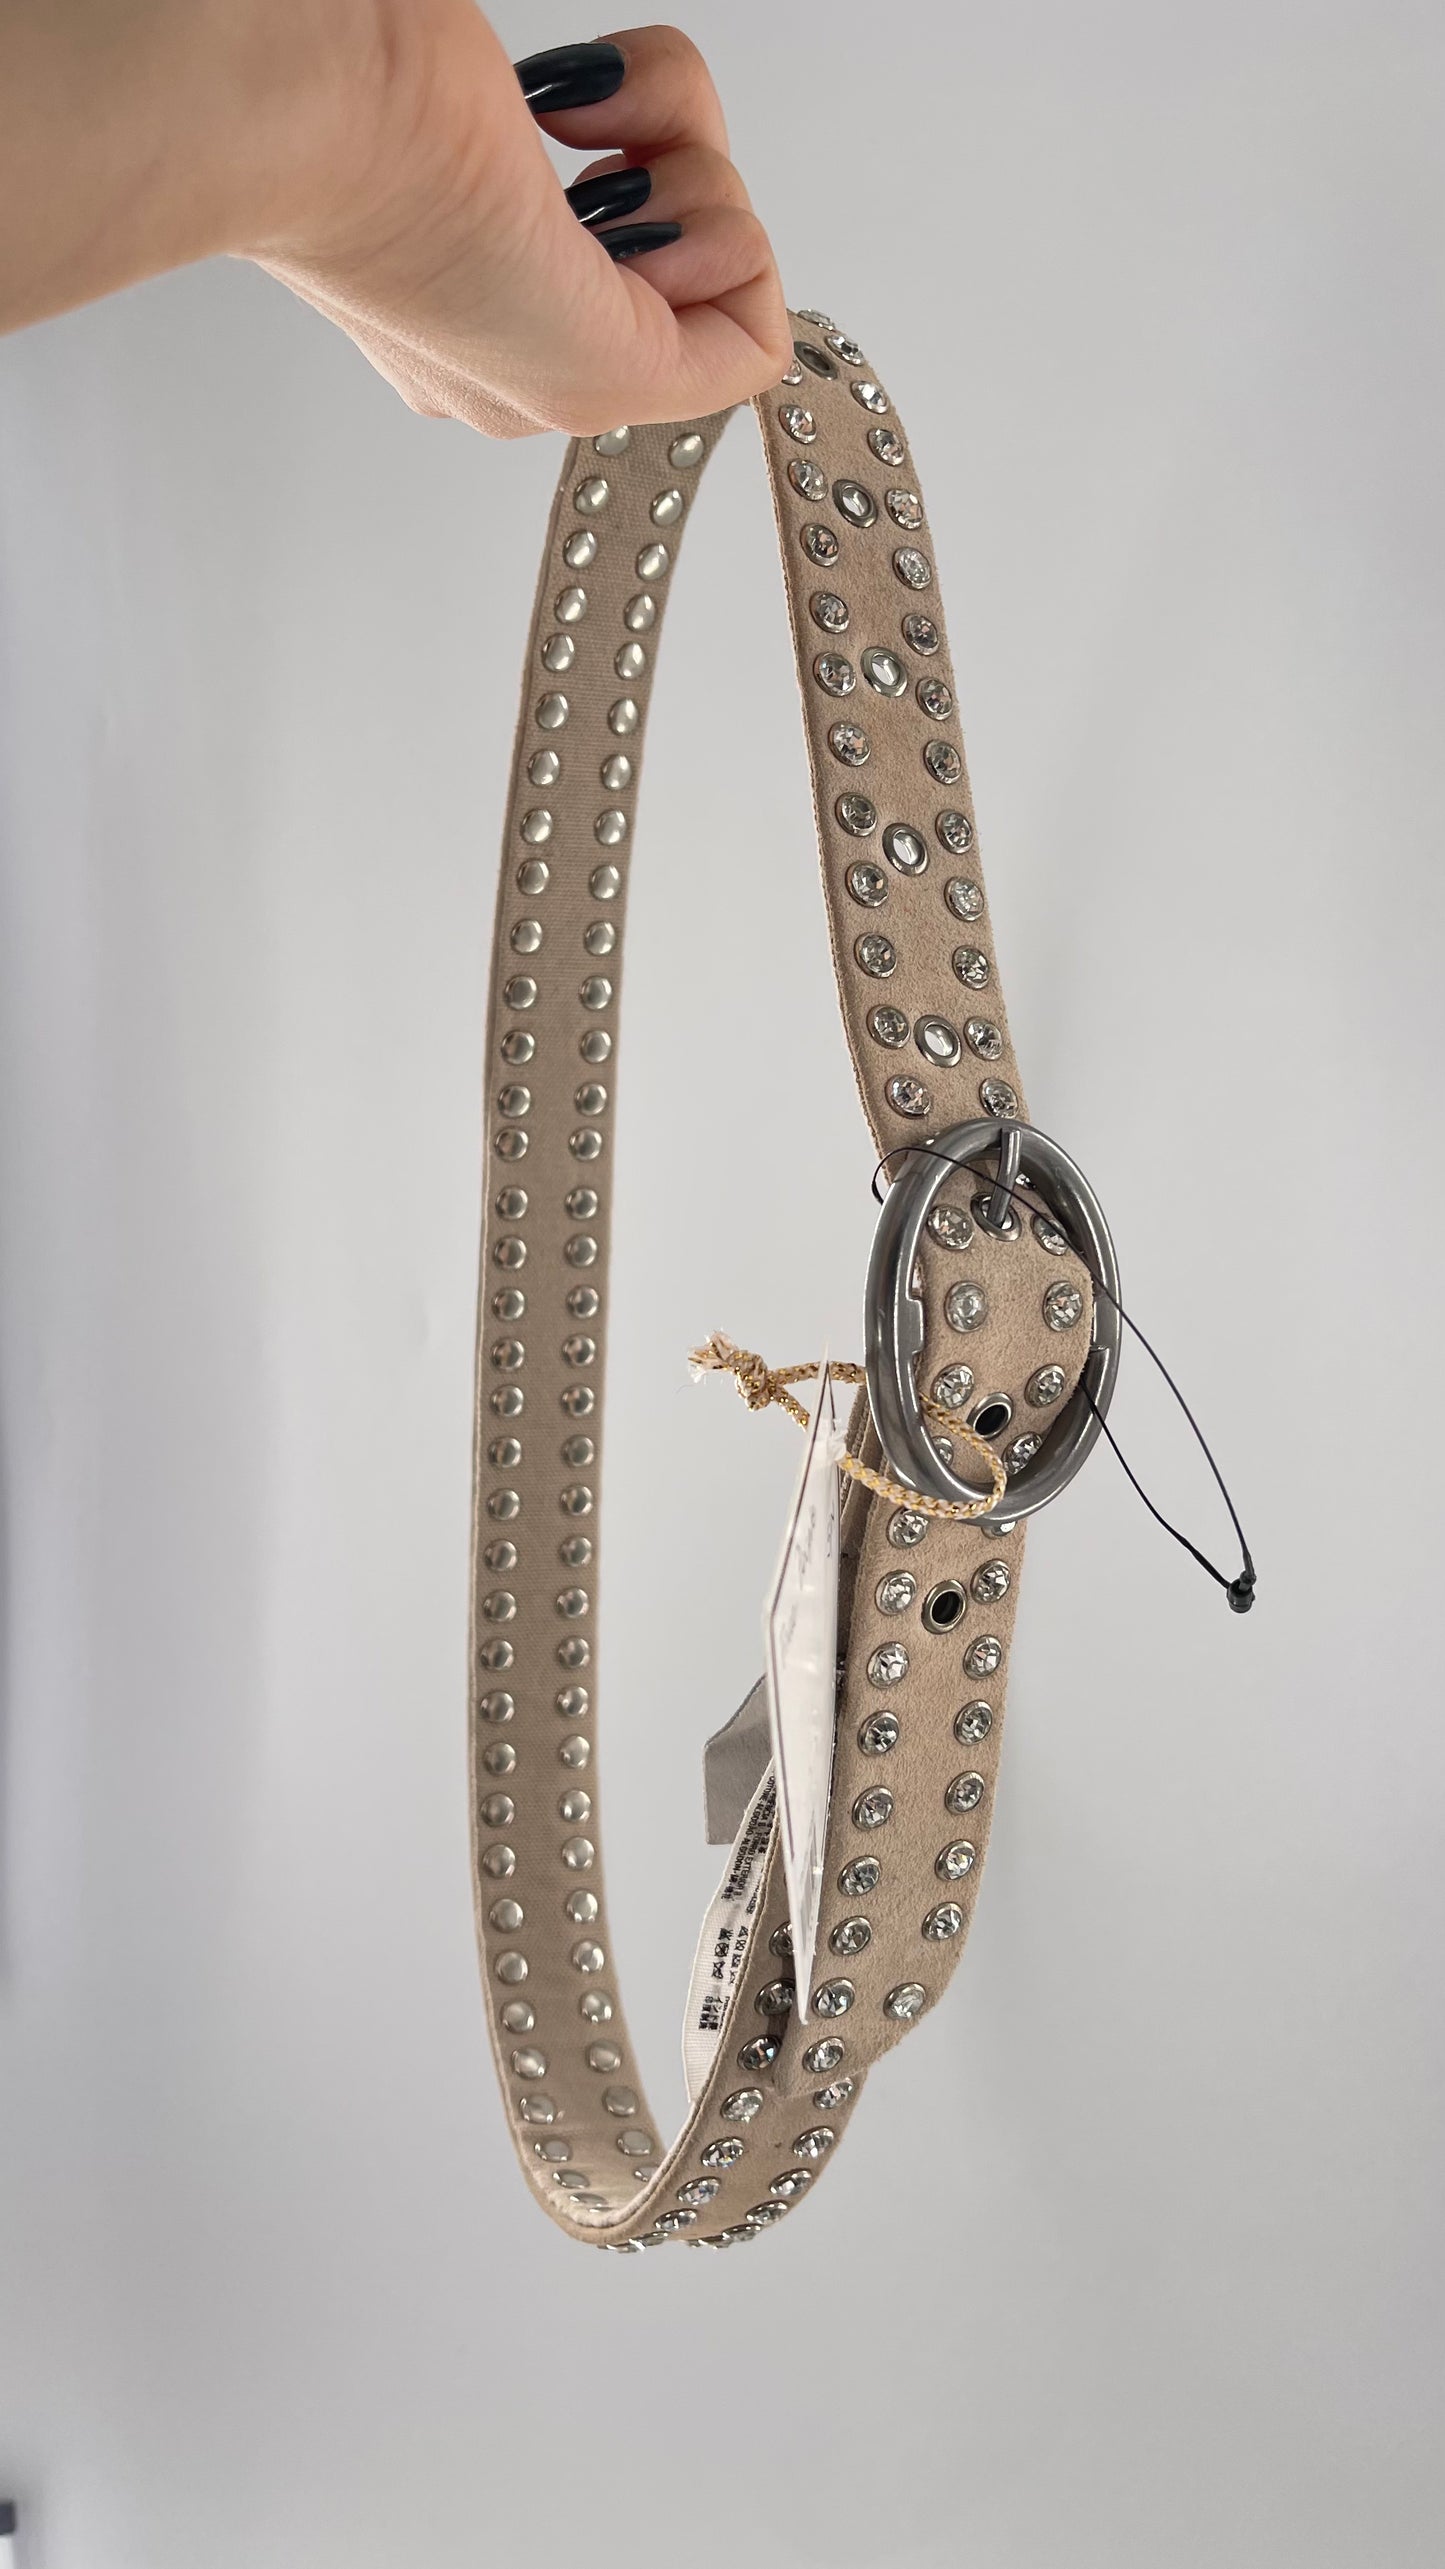 Free People Beige Leather Canvas Studded Rhinestone Crystal Studded Belt with Heavy Metal Buckle (S/M)